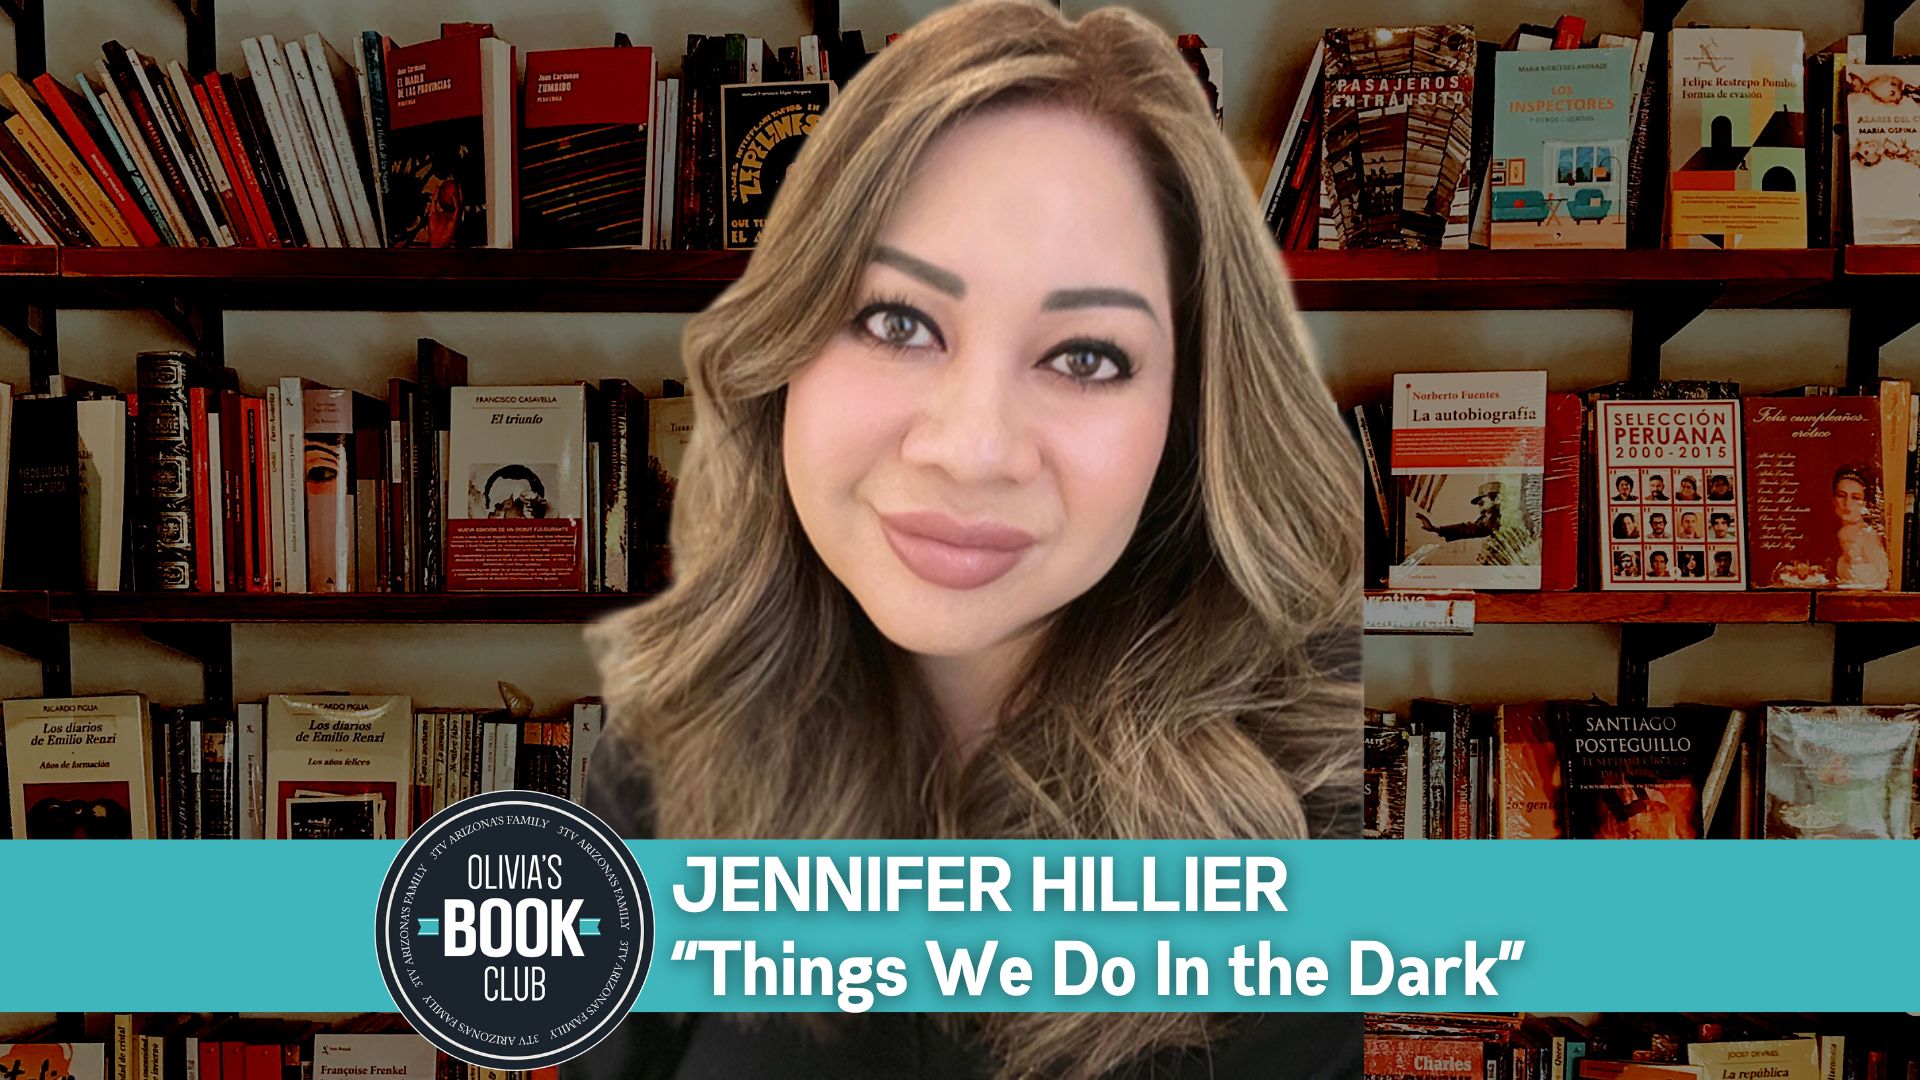 Olivias Book Club Podcast Jennifer Hillier, Things We Do In the Dark